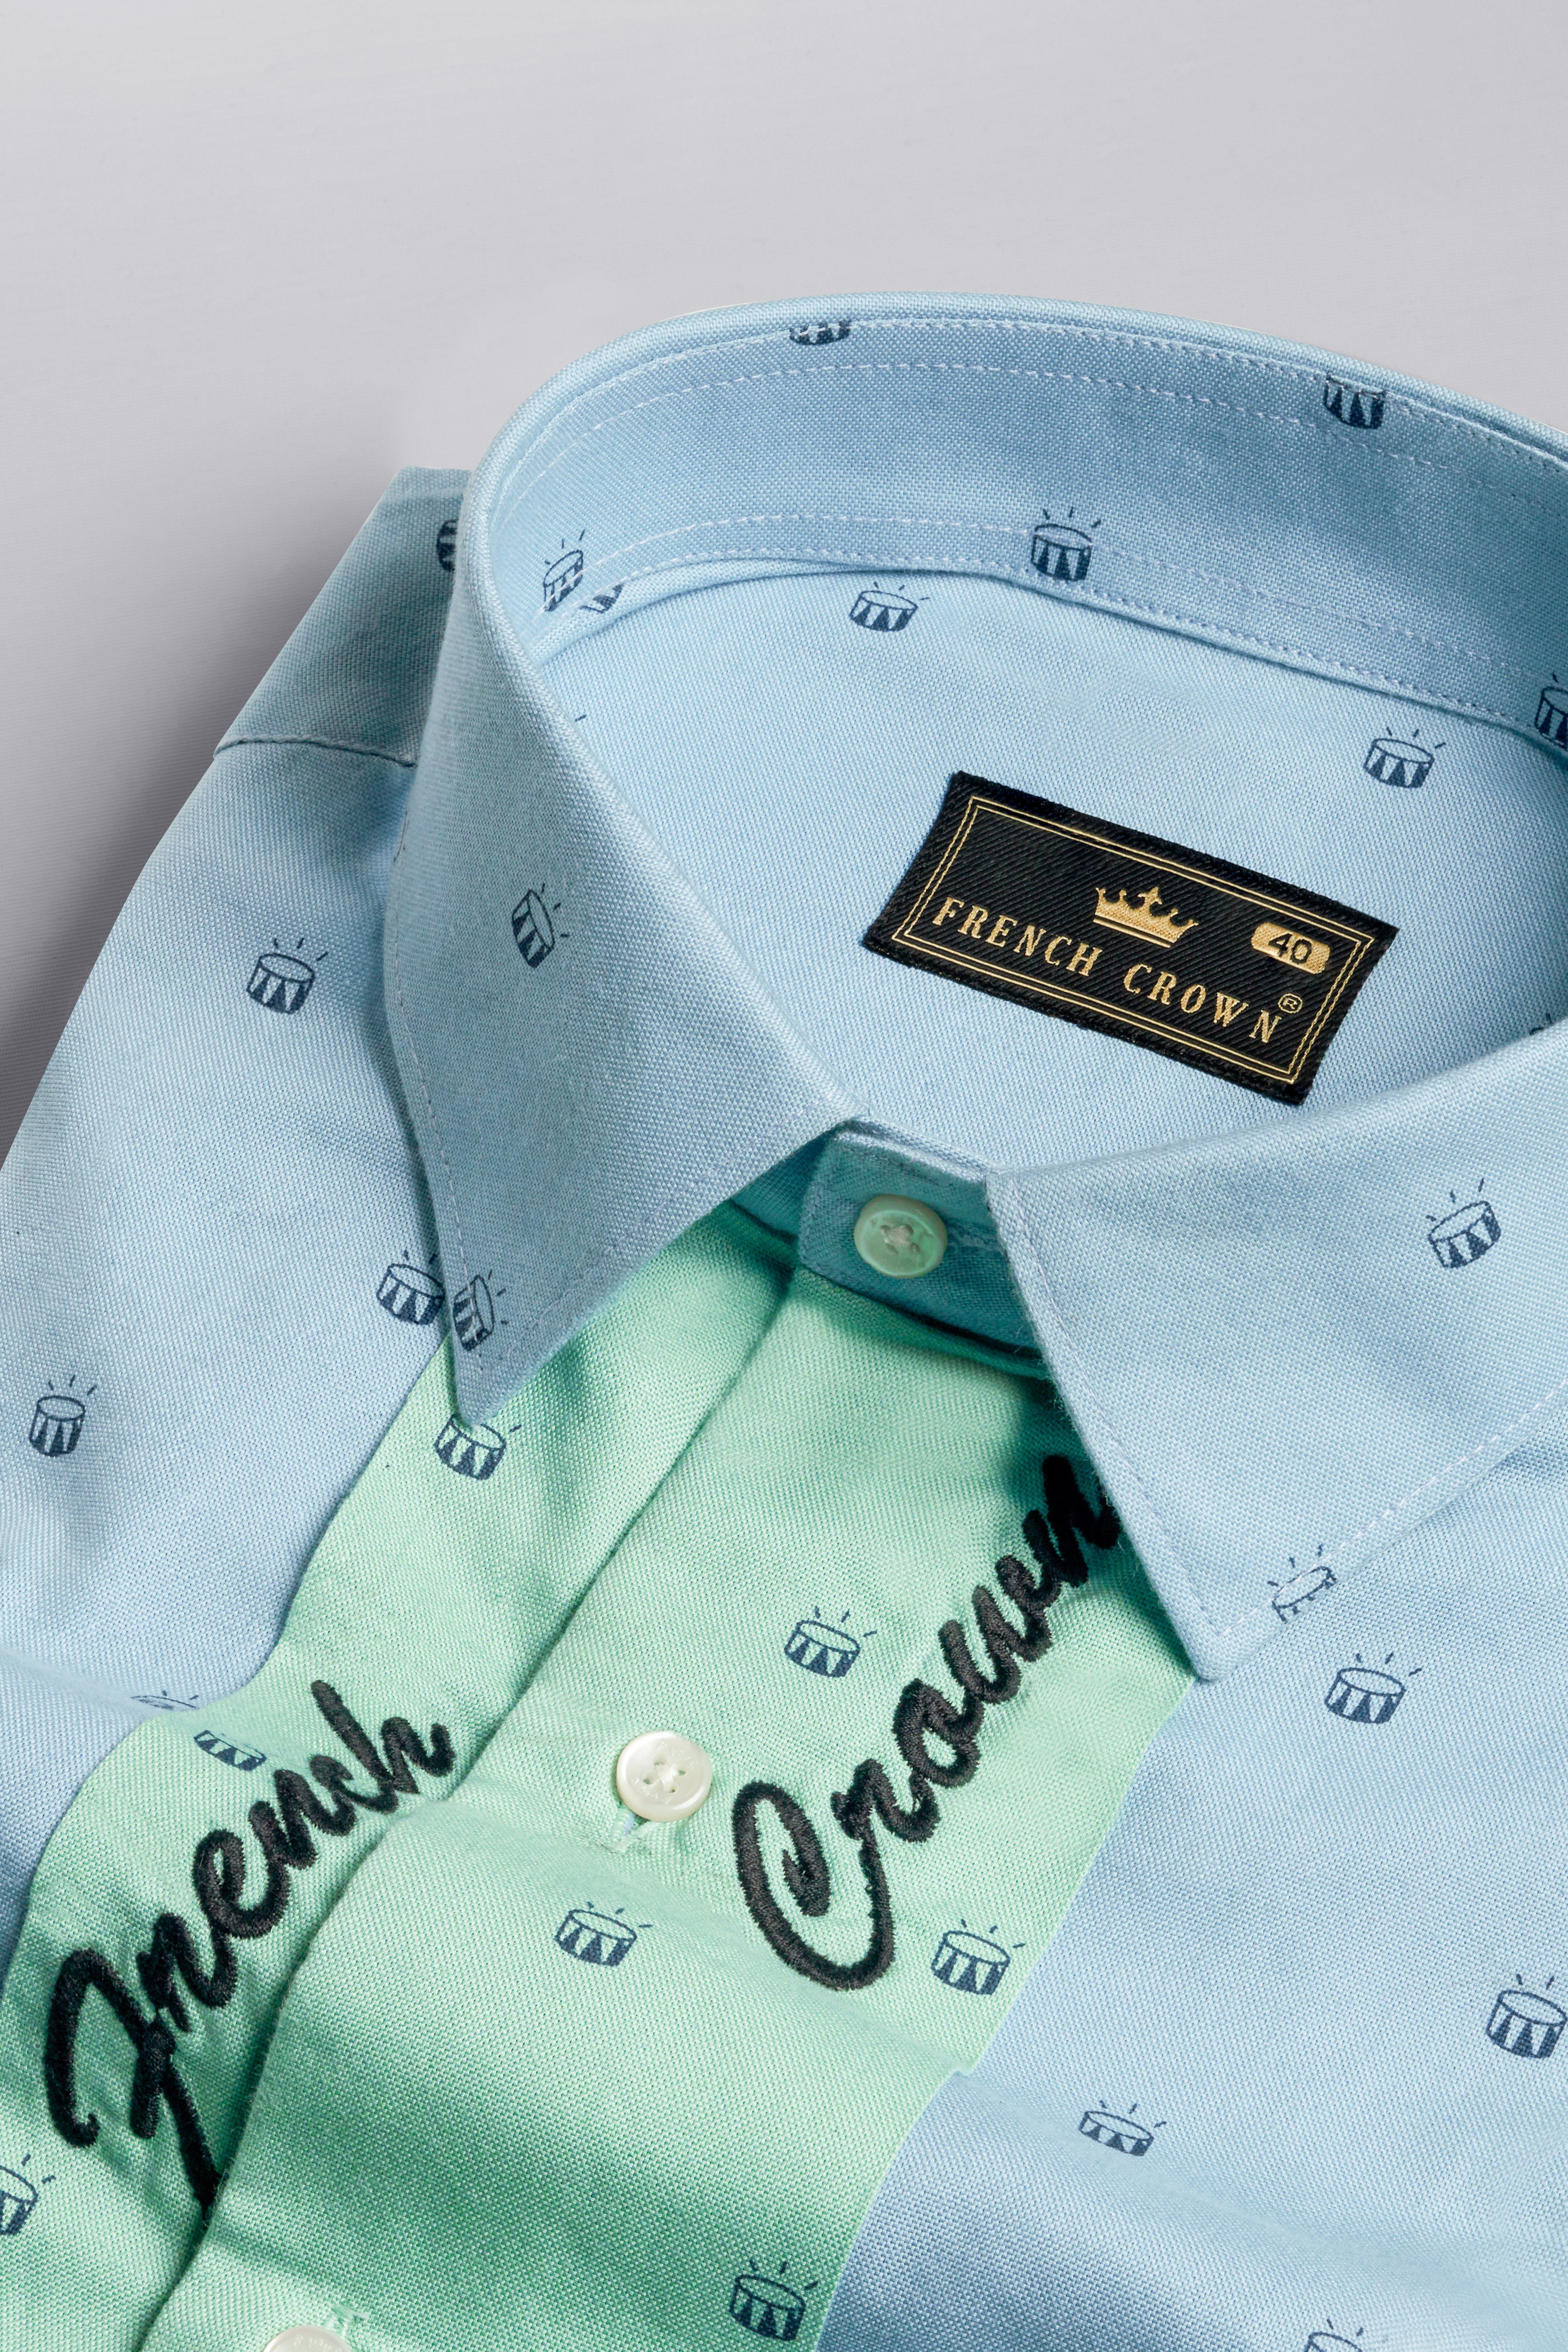 Carolina Blue with Downy Green French Crown Embroidered Patchwork Royal Oxford Designer Shirt